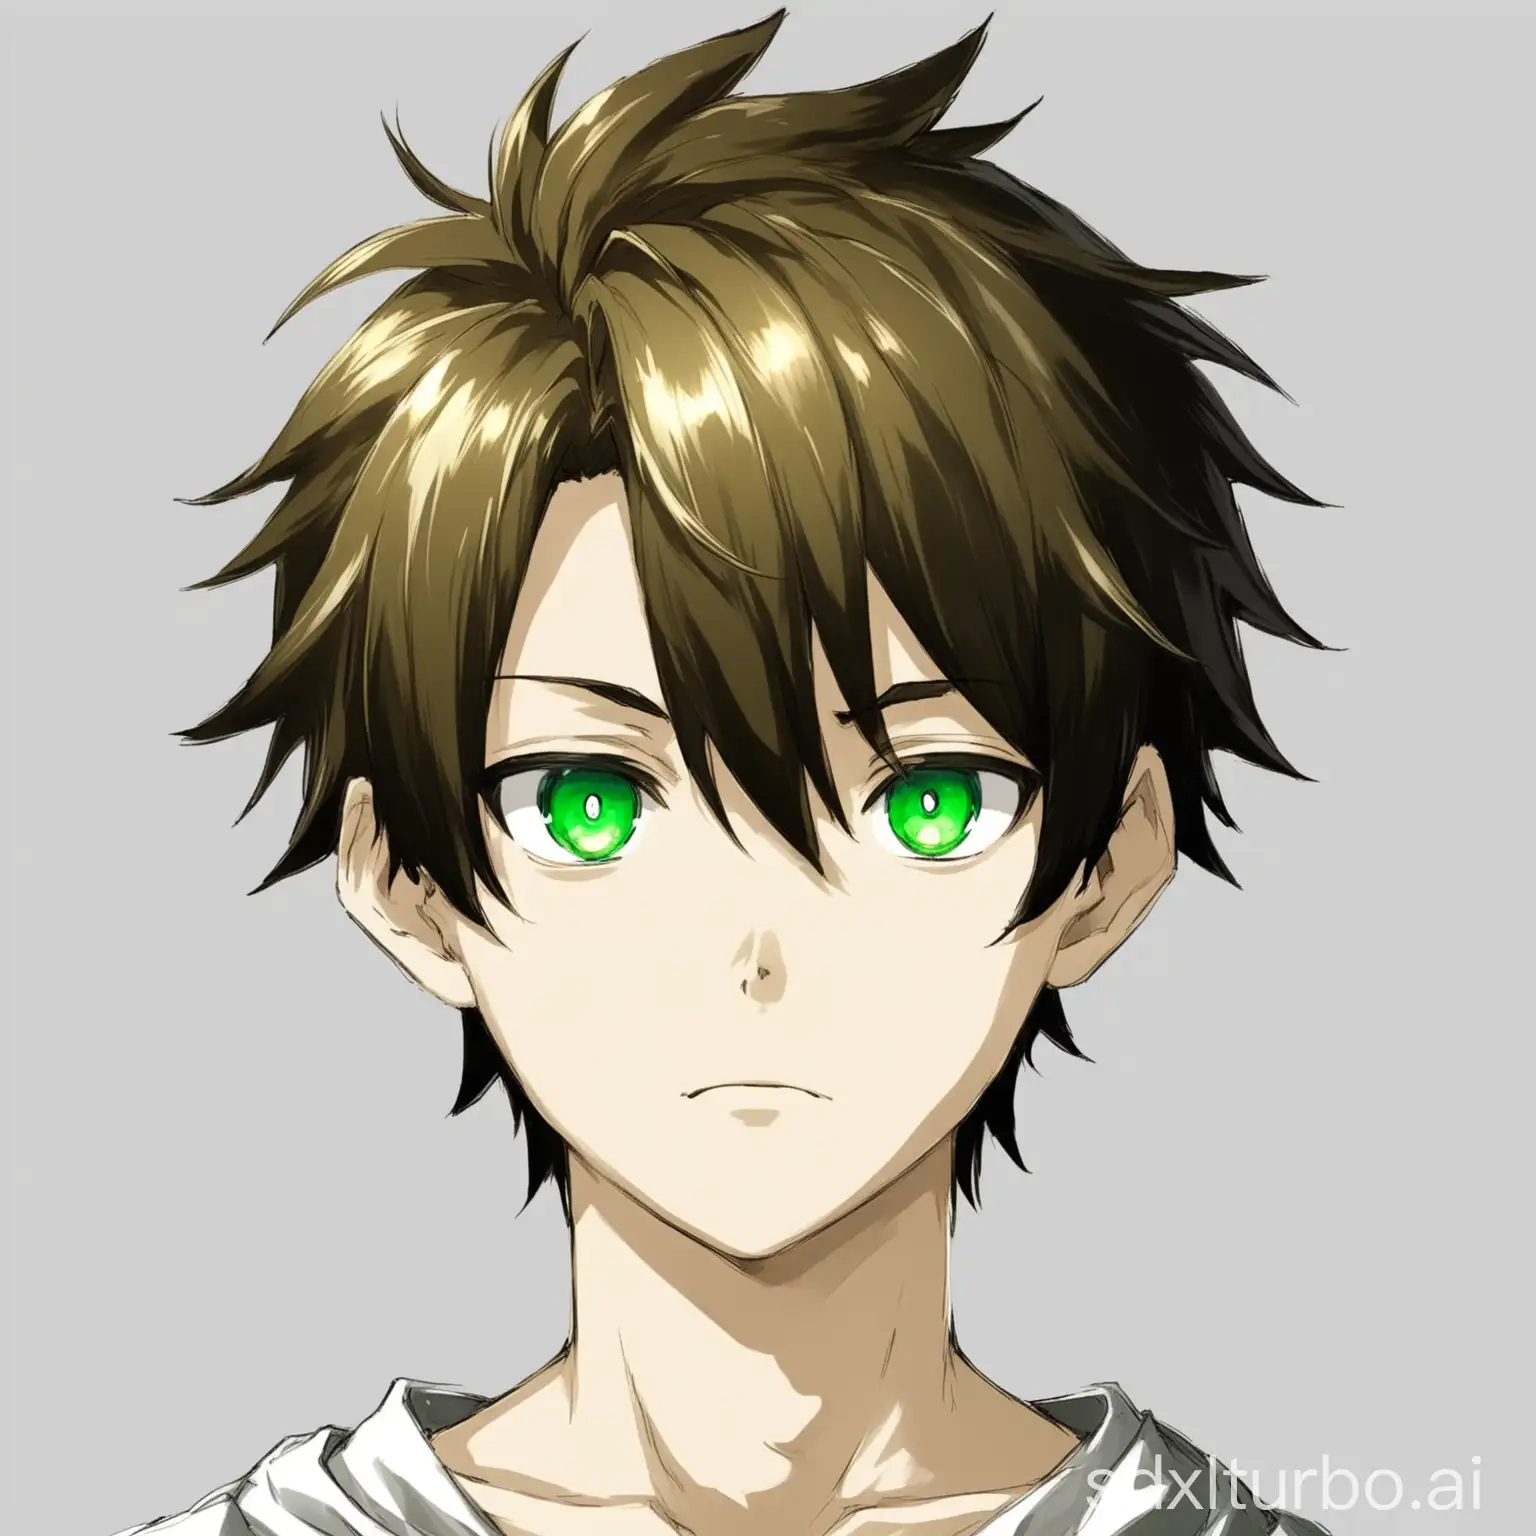 Anime-Character-Portrait-18YearOld-Boy-with-Dark-Gold-Hair-and-Green-Eyes